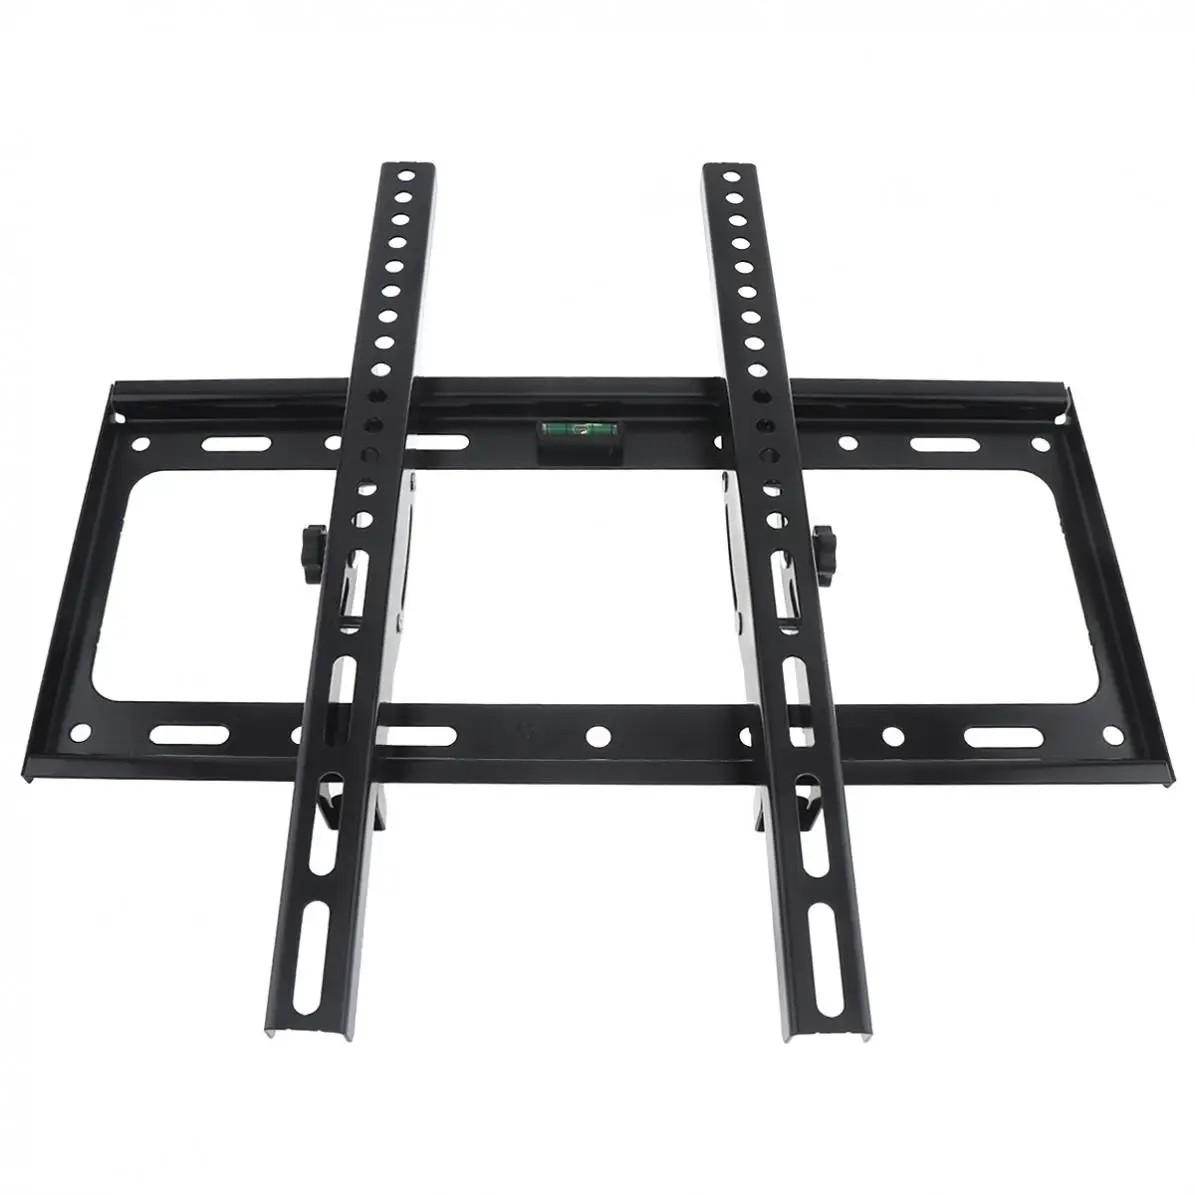 Universal TV Wall Mount 60Kg Adjustable Tilted Monitor Support PC Screen Holder Bracket For 42Inch 65Inch 75Inch Wall Stand